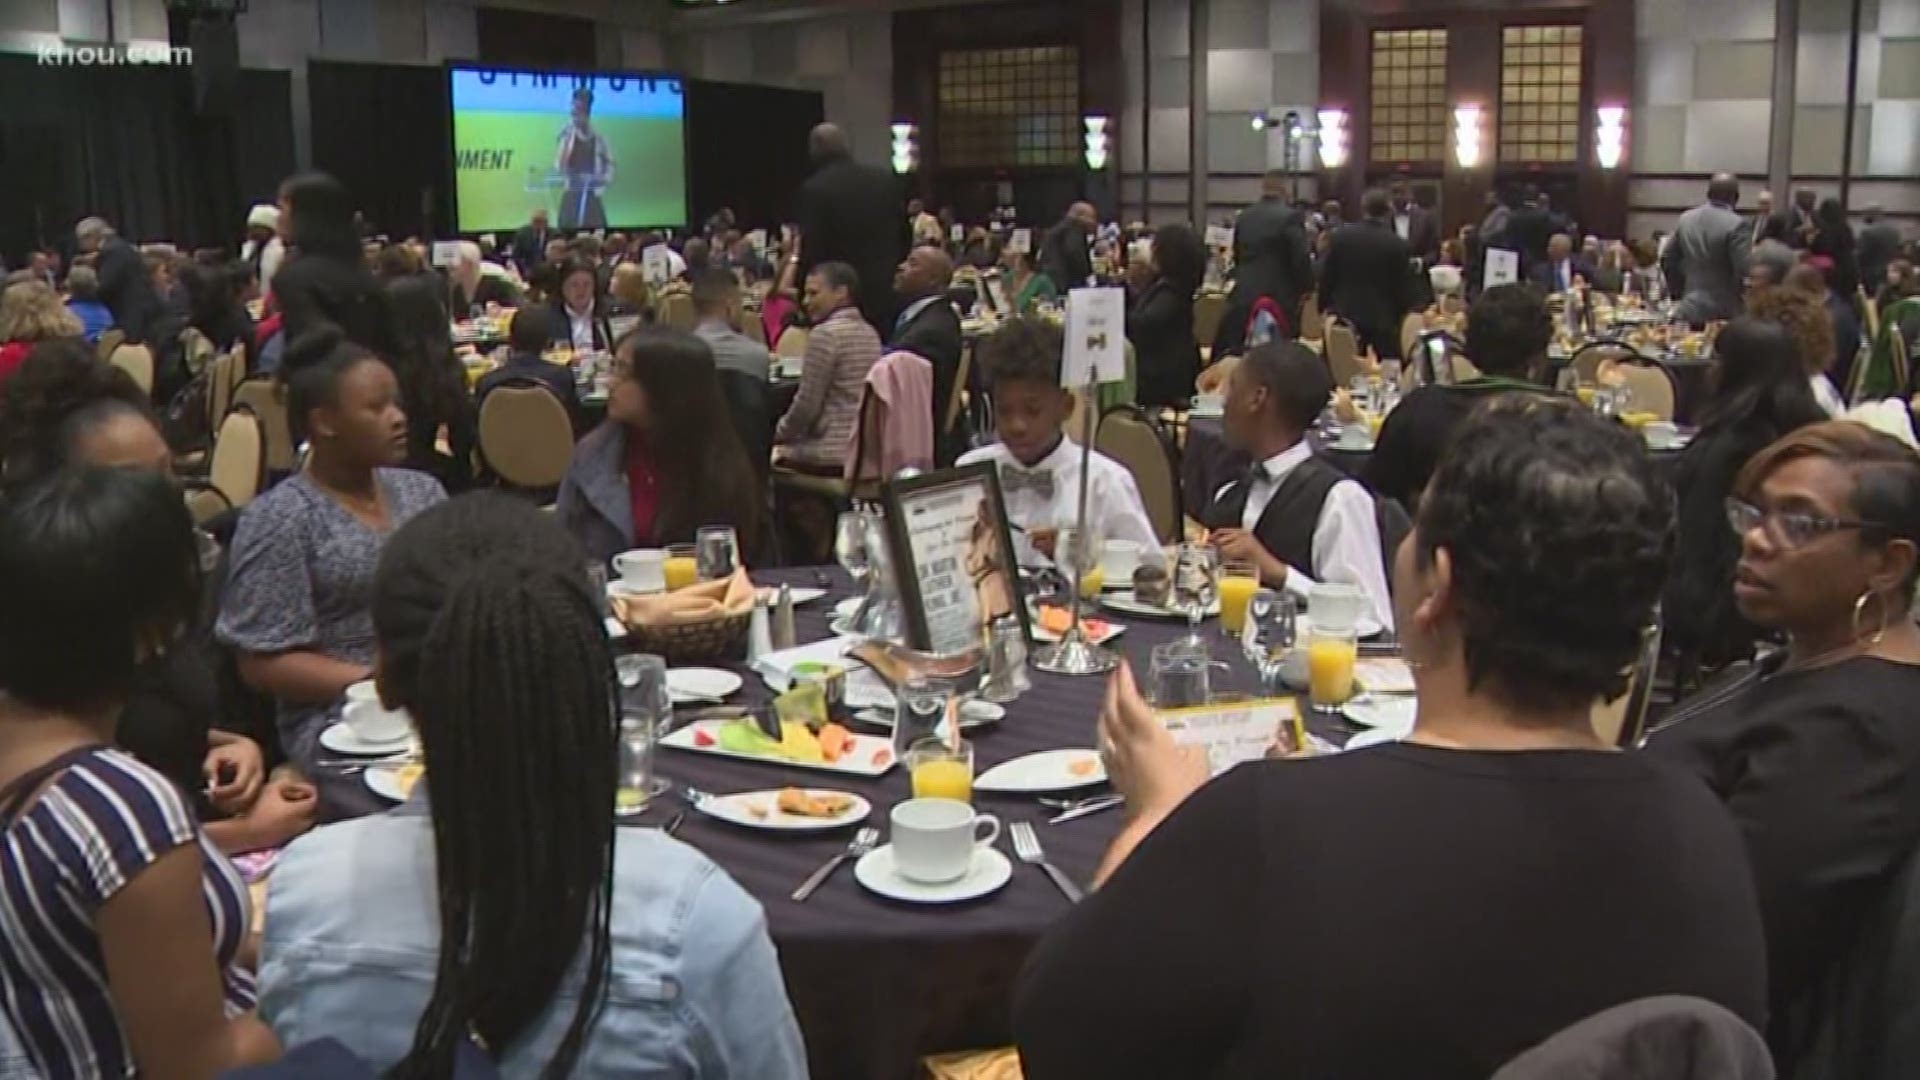 The city of Houston started their Martin Luther King Day celebrations with a memorial scholarship breakfast. KHOU 11 Len Cannon served as emcee.